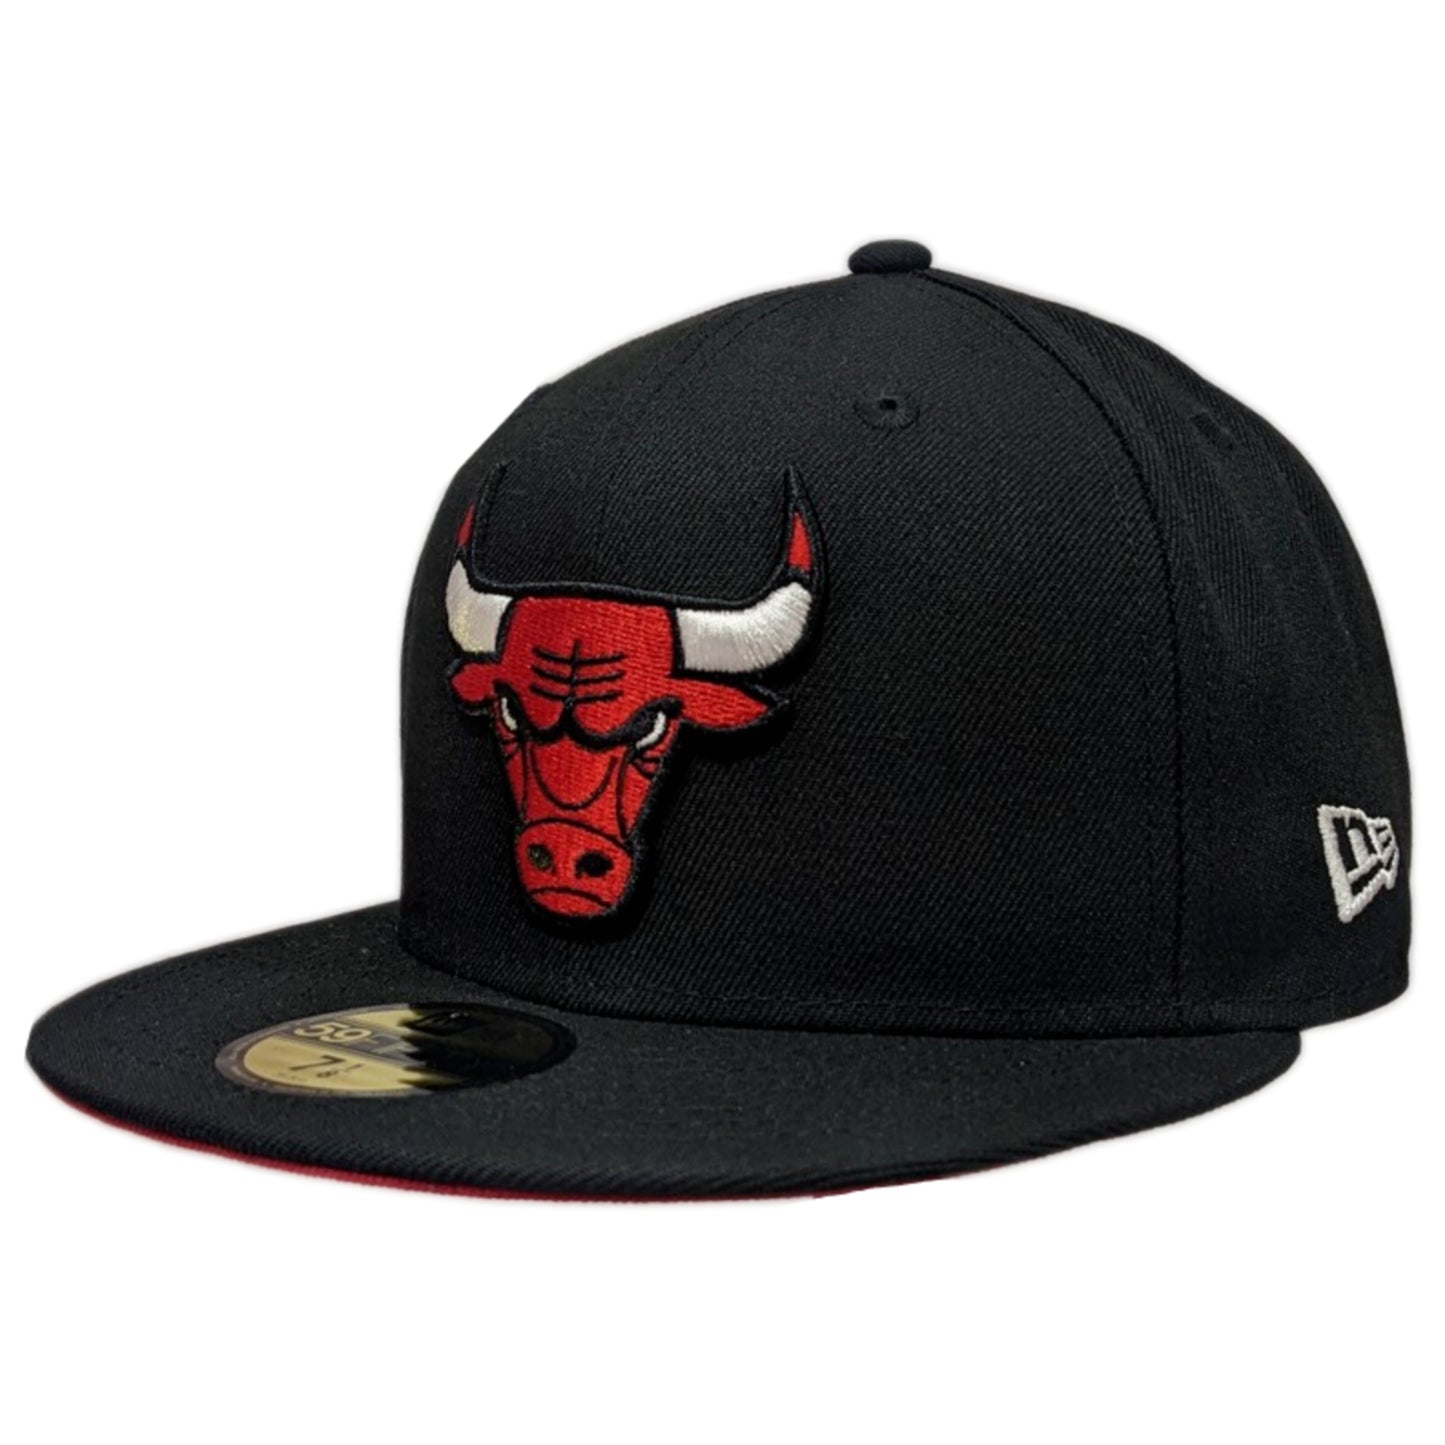 Men's Chicago Bulls Black/Red 6X Champions 59FIFTY Fitted Hat